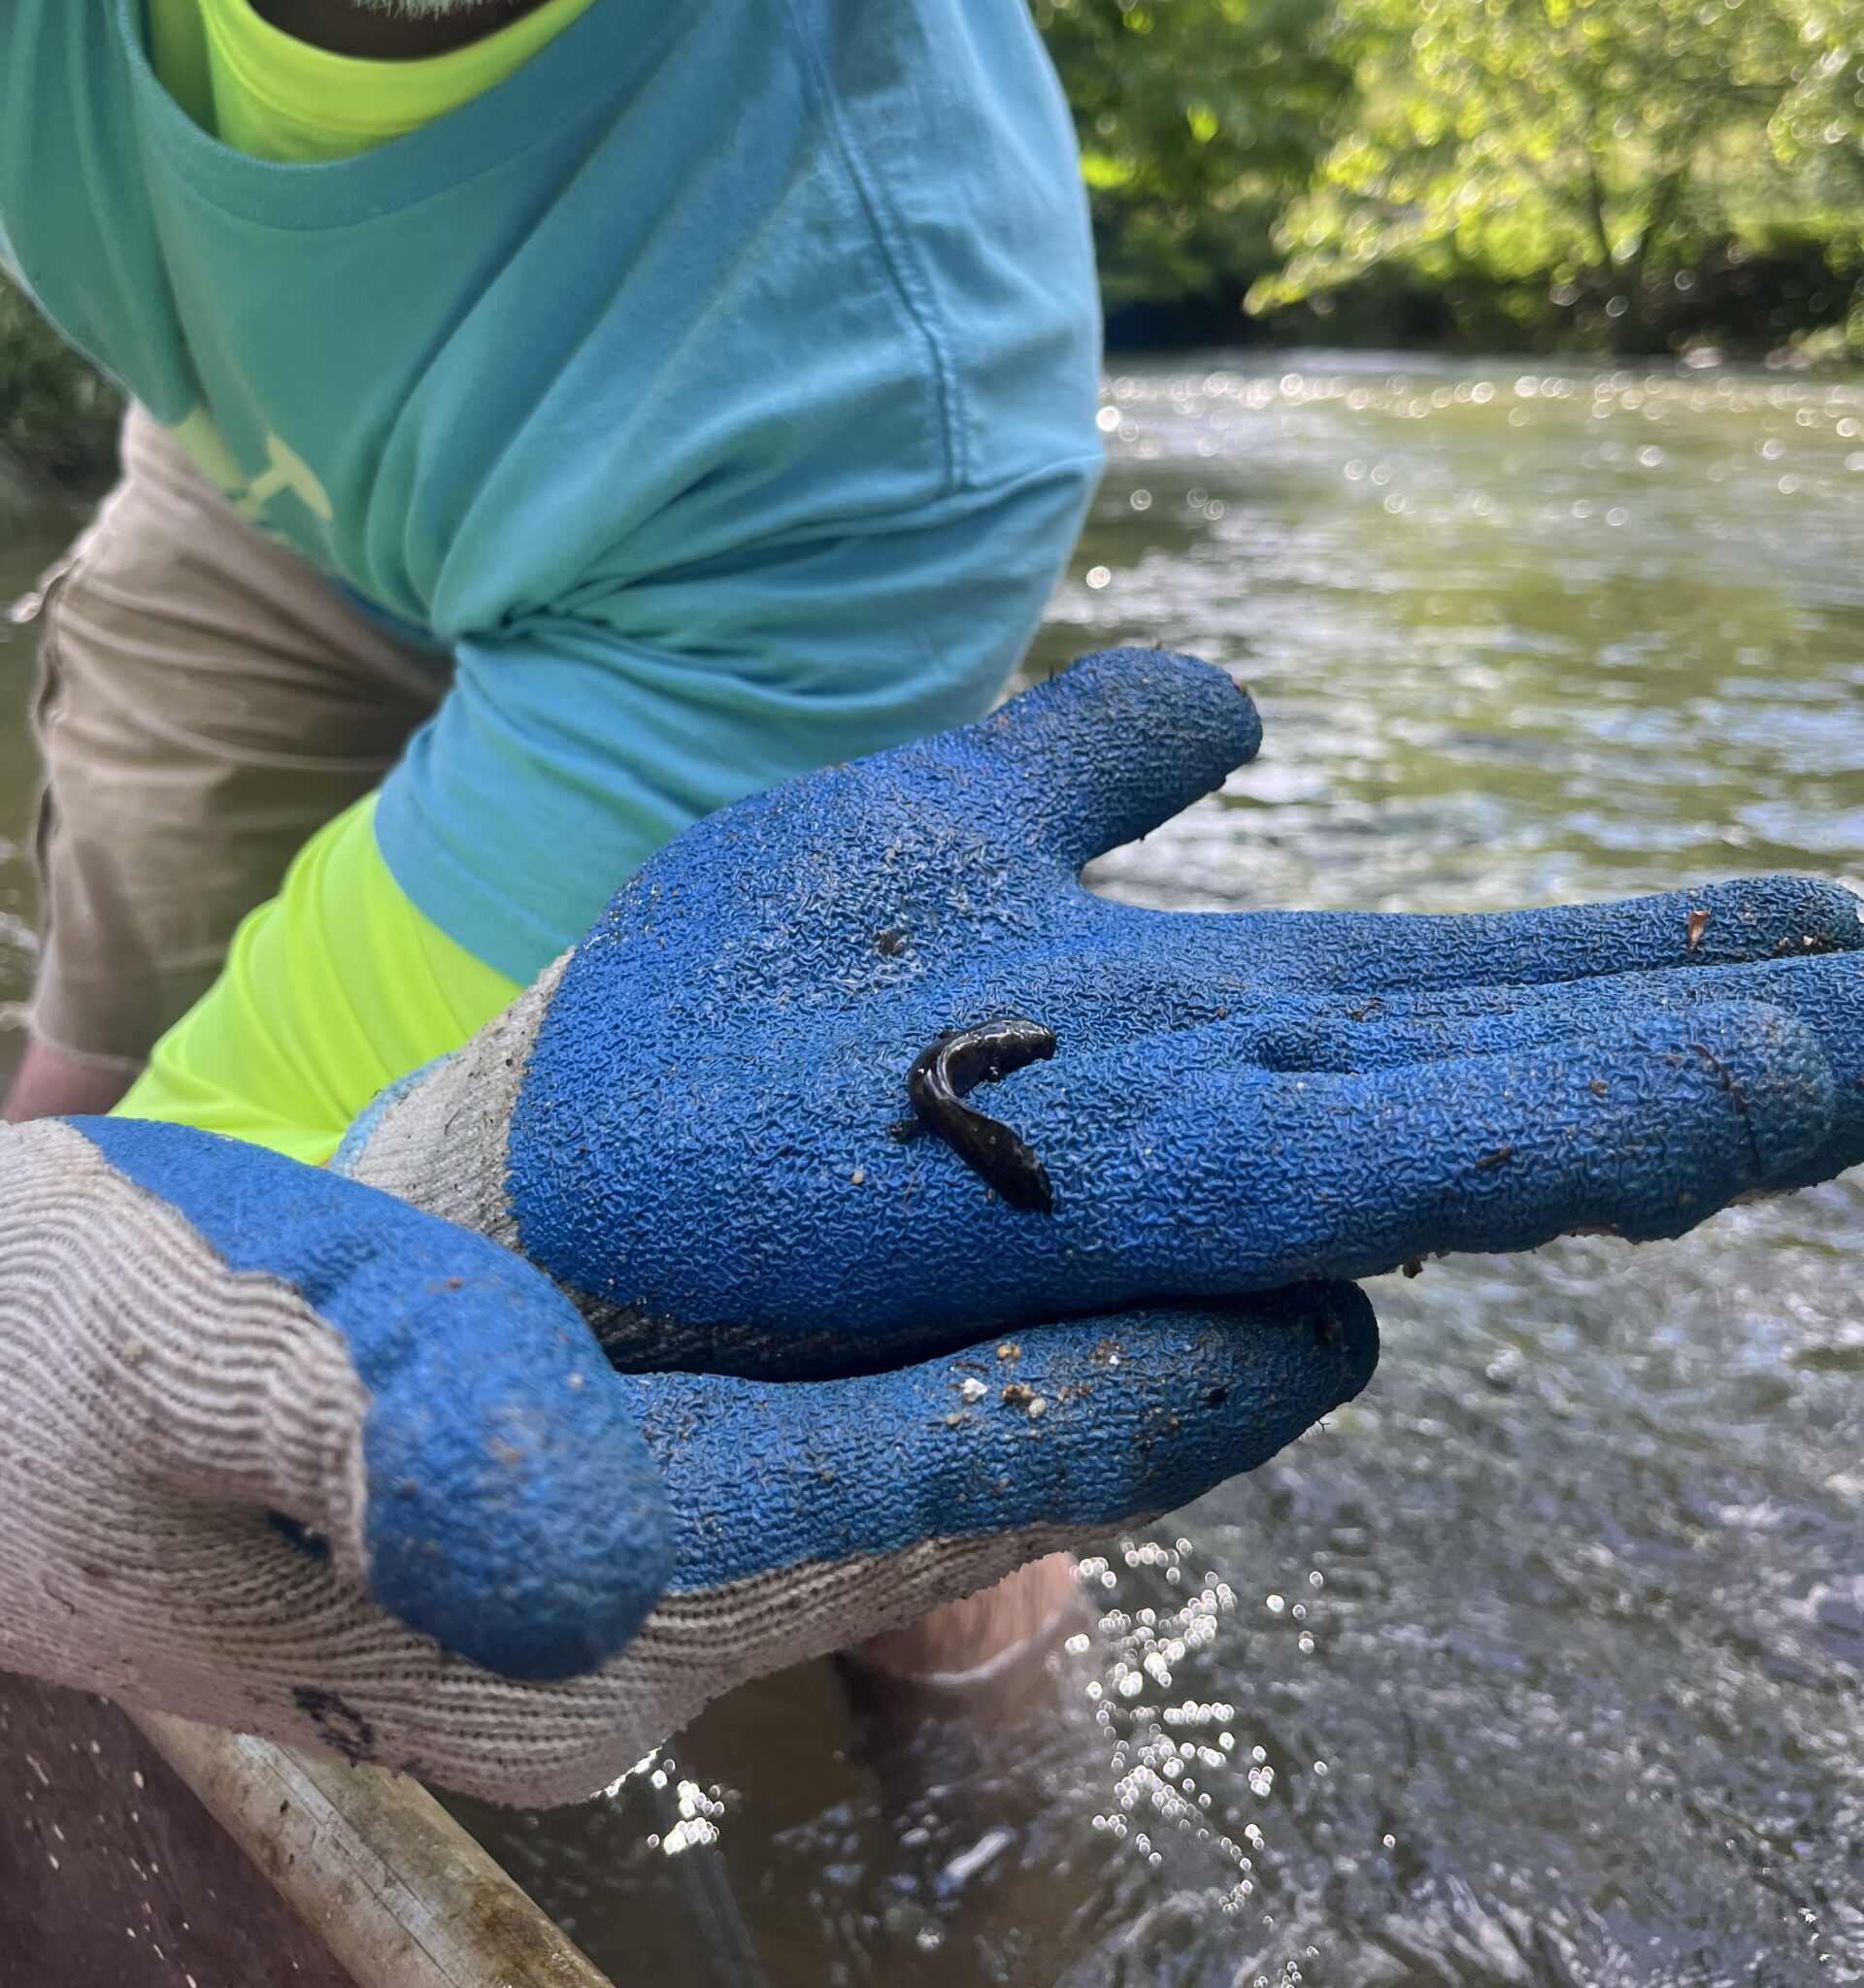 Larval hellbender discovered during New River Conservancy river clean up